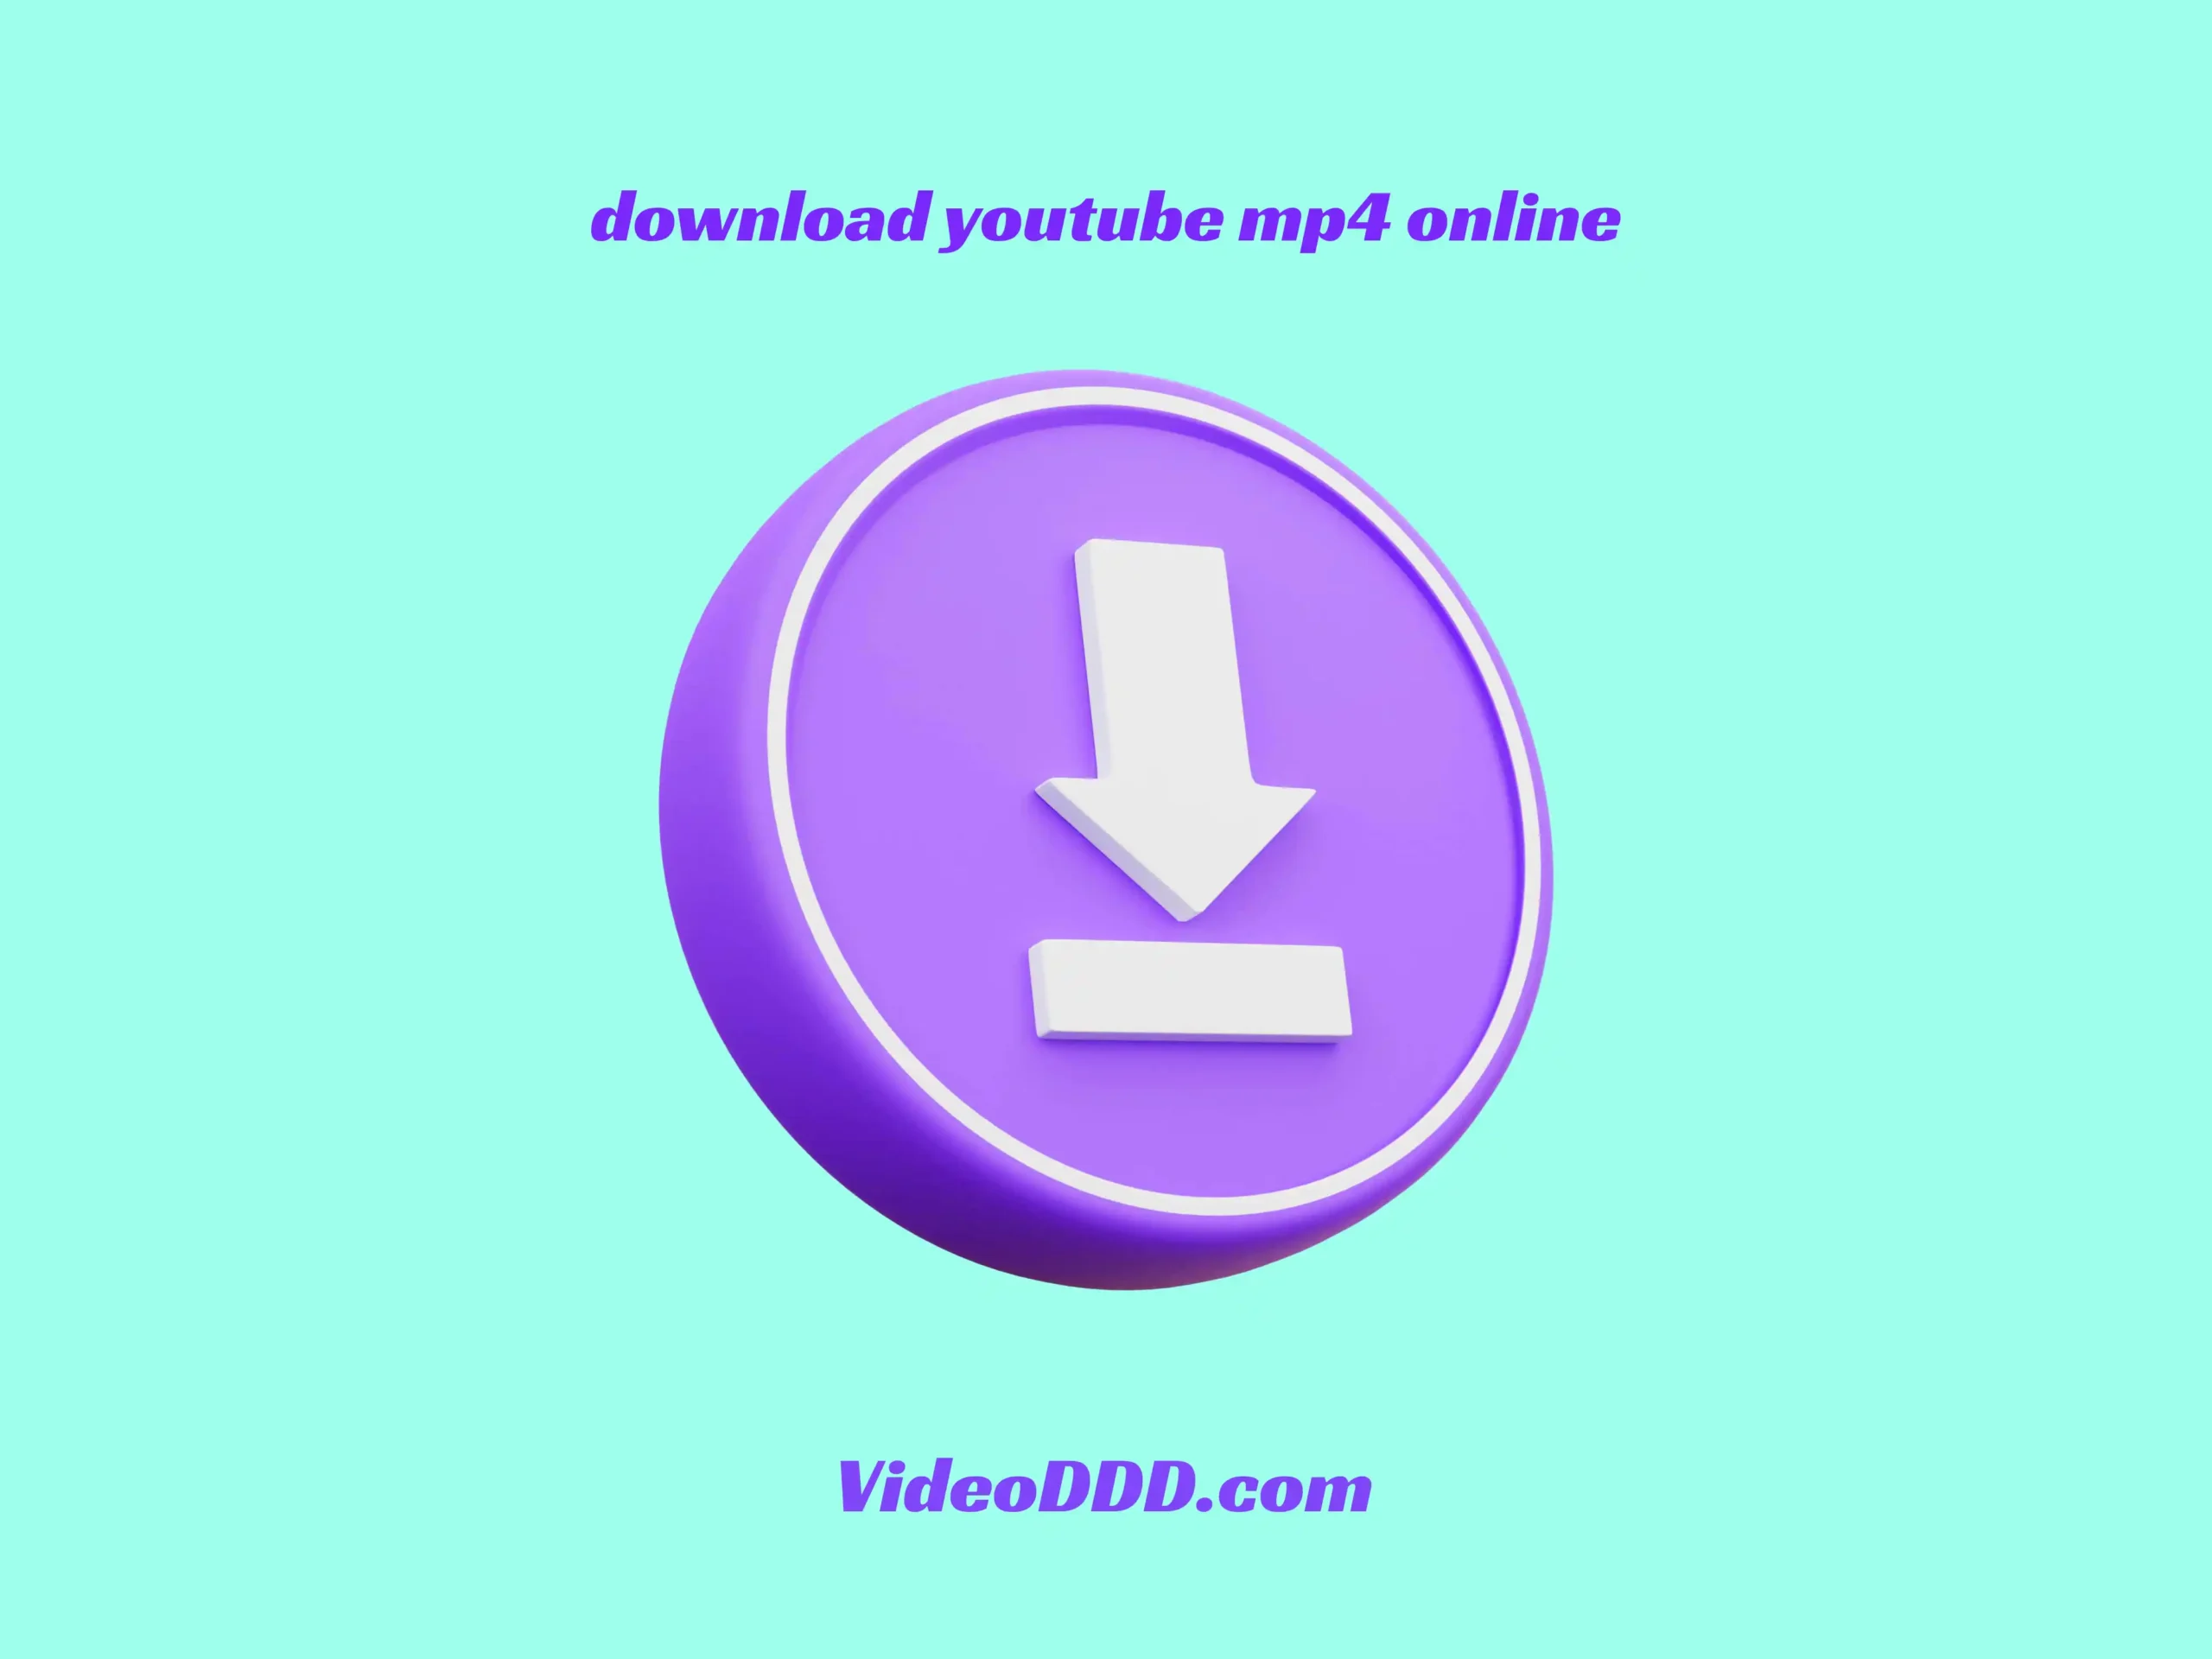 Download YouTube MP4 Online – YouTube Video Downloader